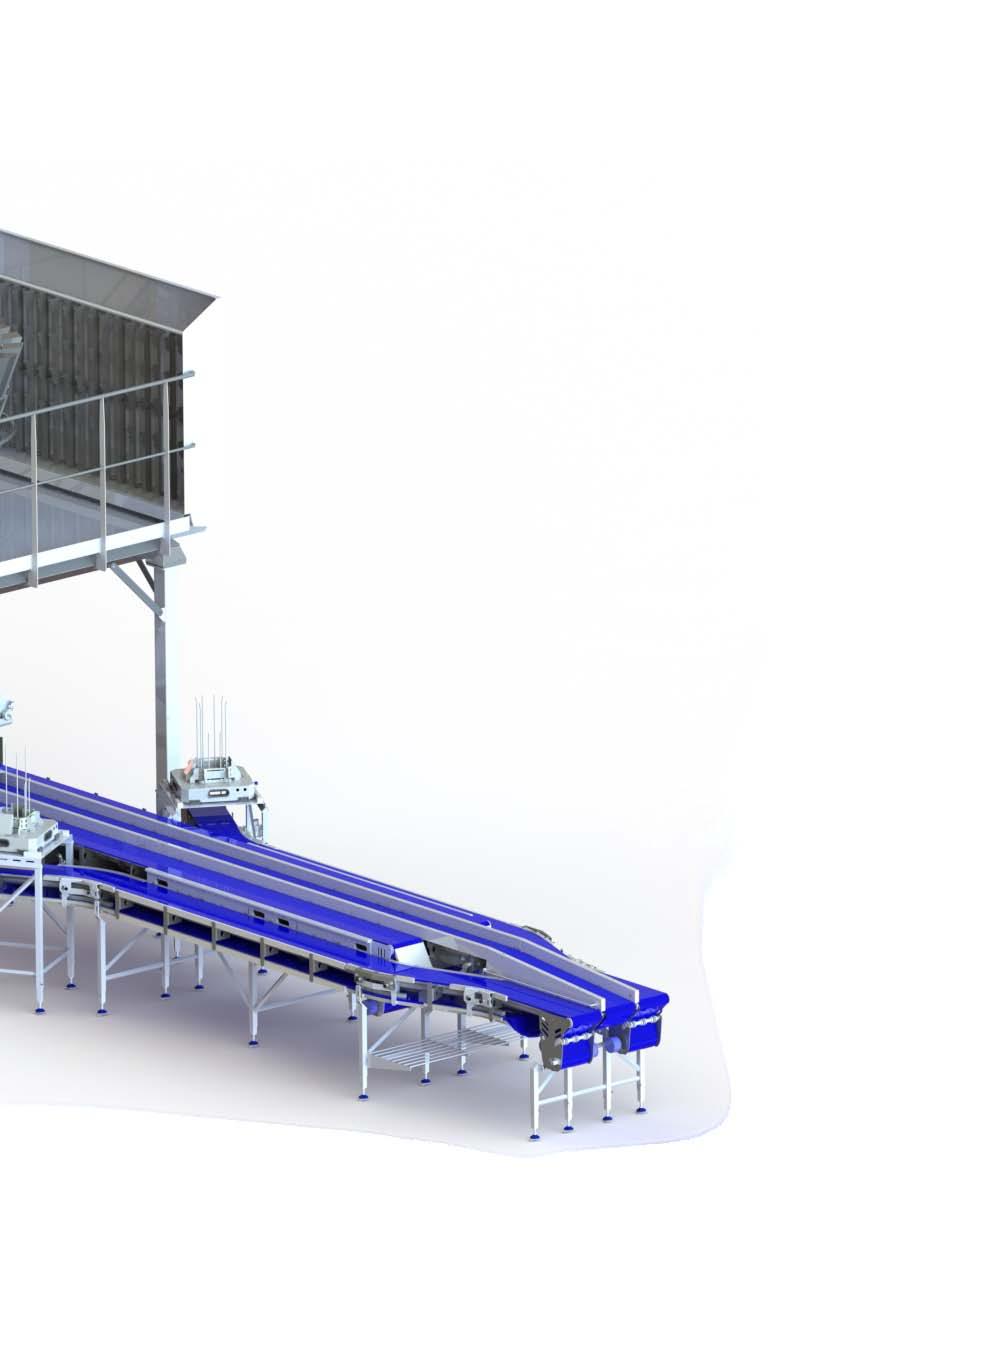 MHW Fresh Poultry Multihead weigher for fresh products The MHW Fresh Poultry multihead weigher range has been designed specifically for batching various types of products and batch sizes at